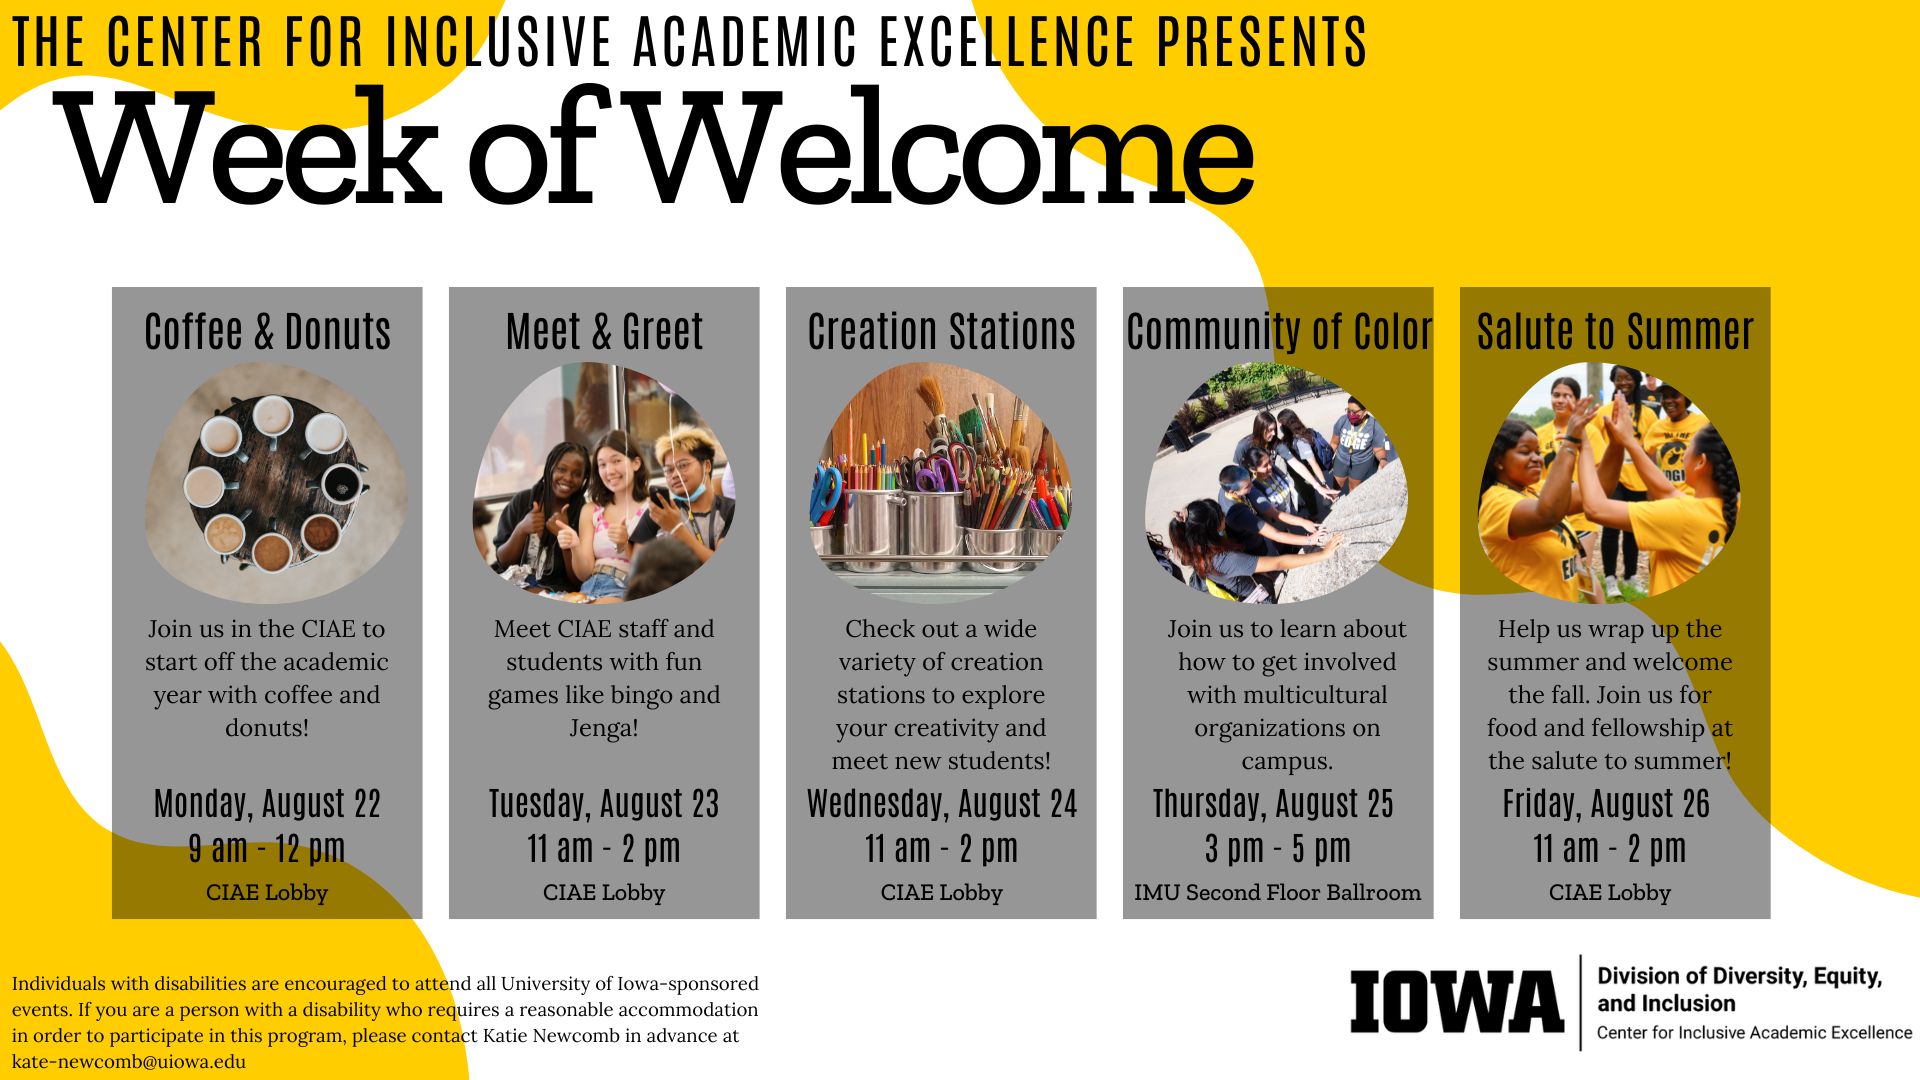 Schedule of events for week of welcome